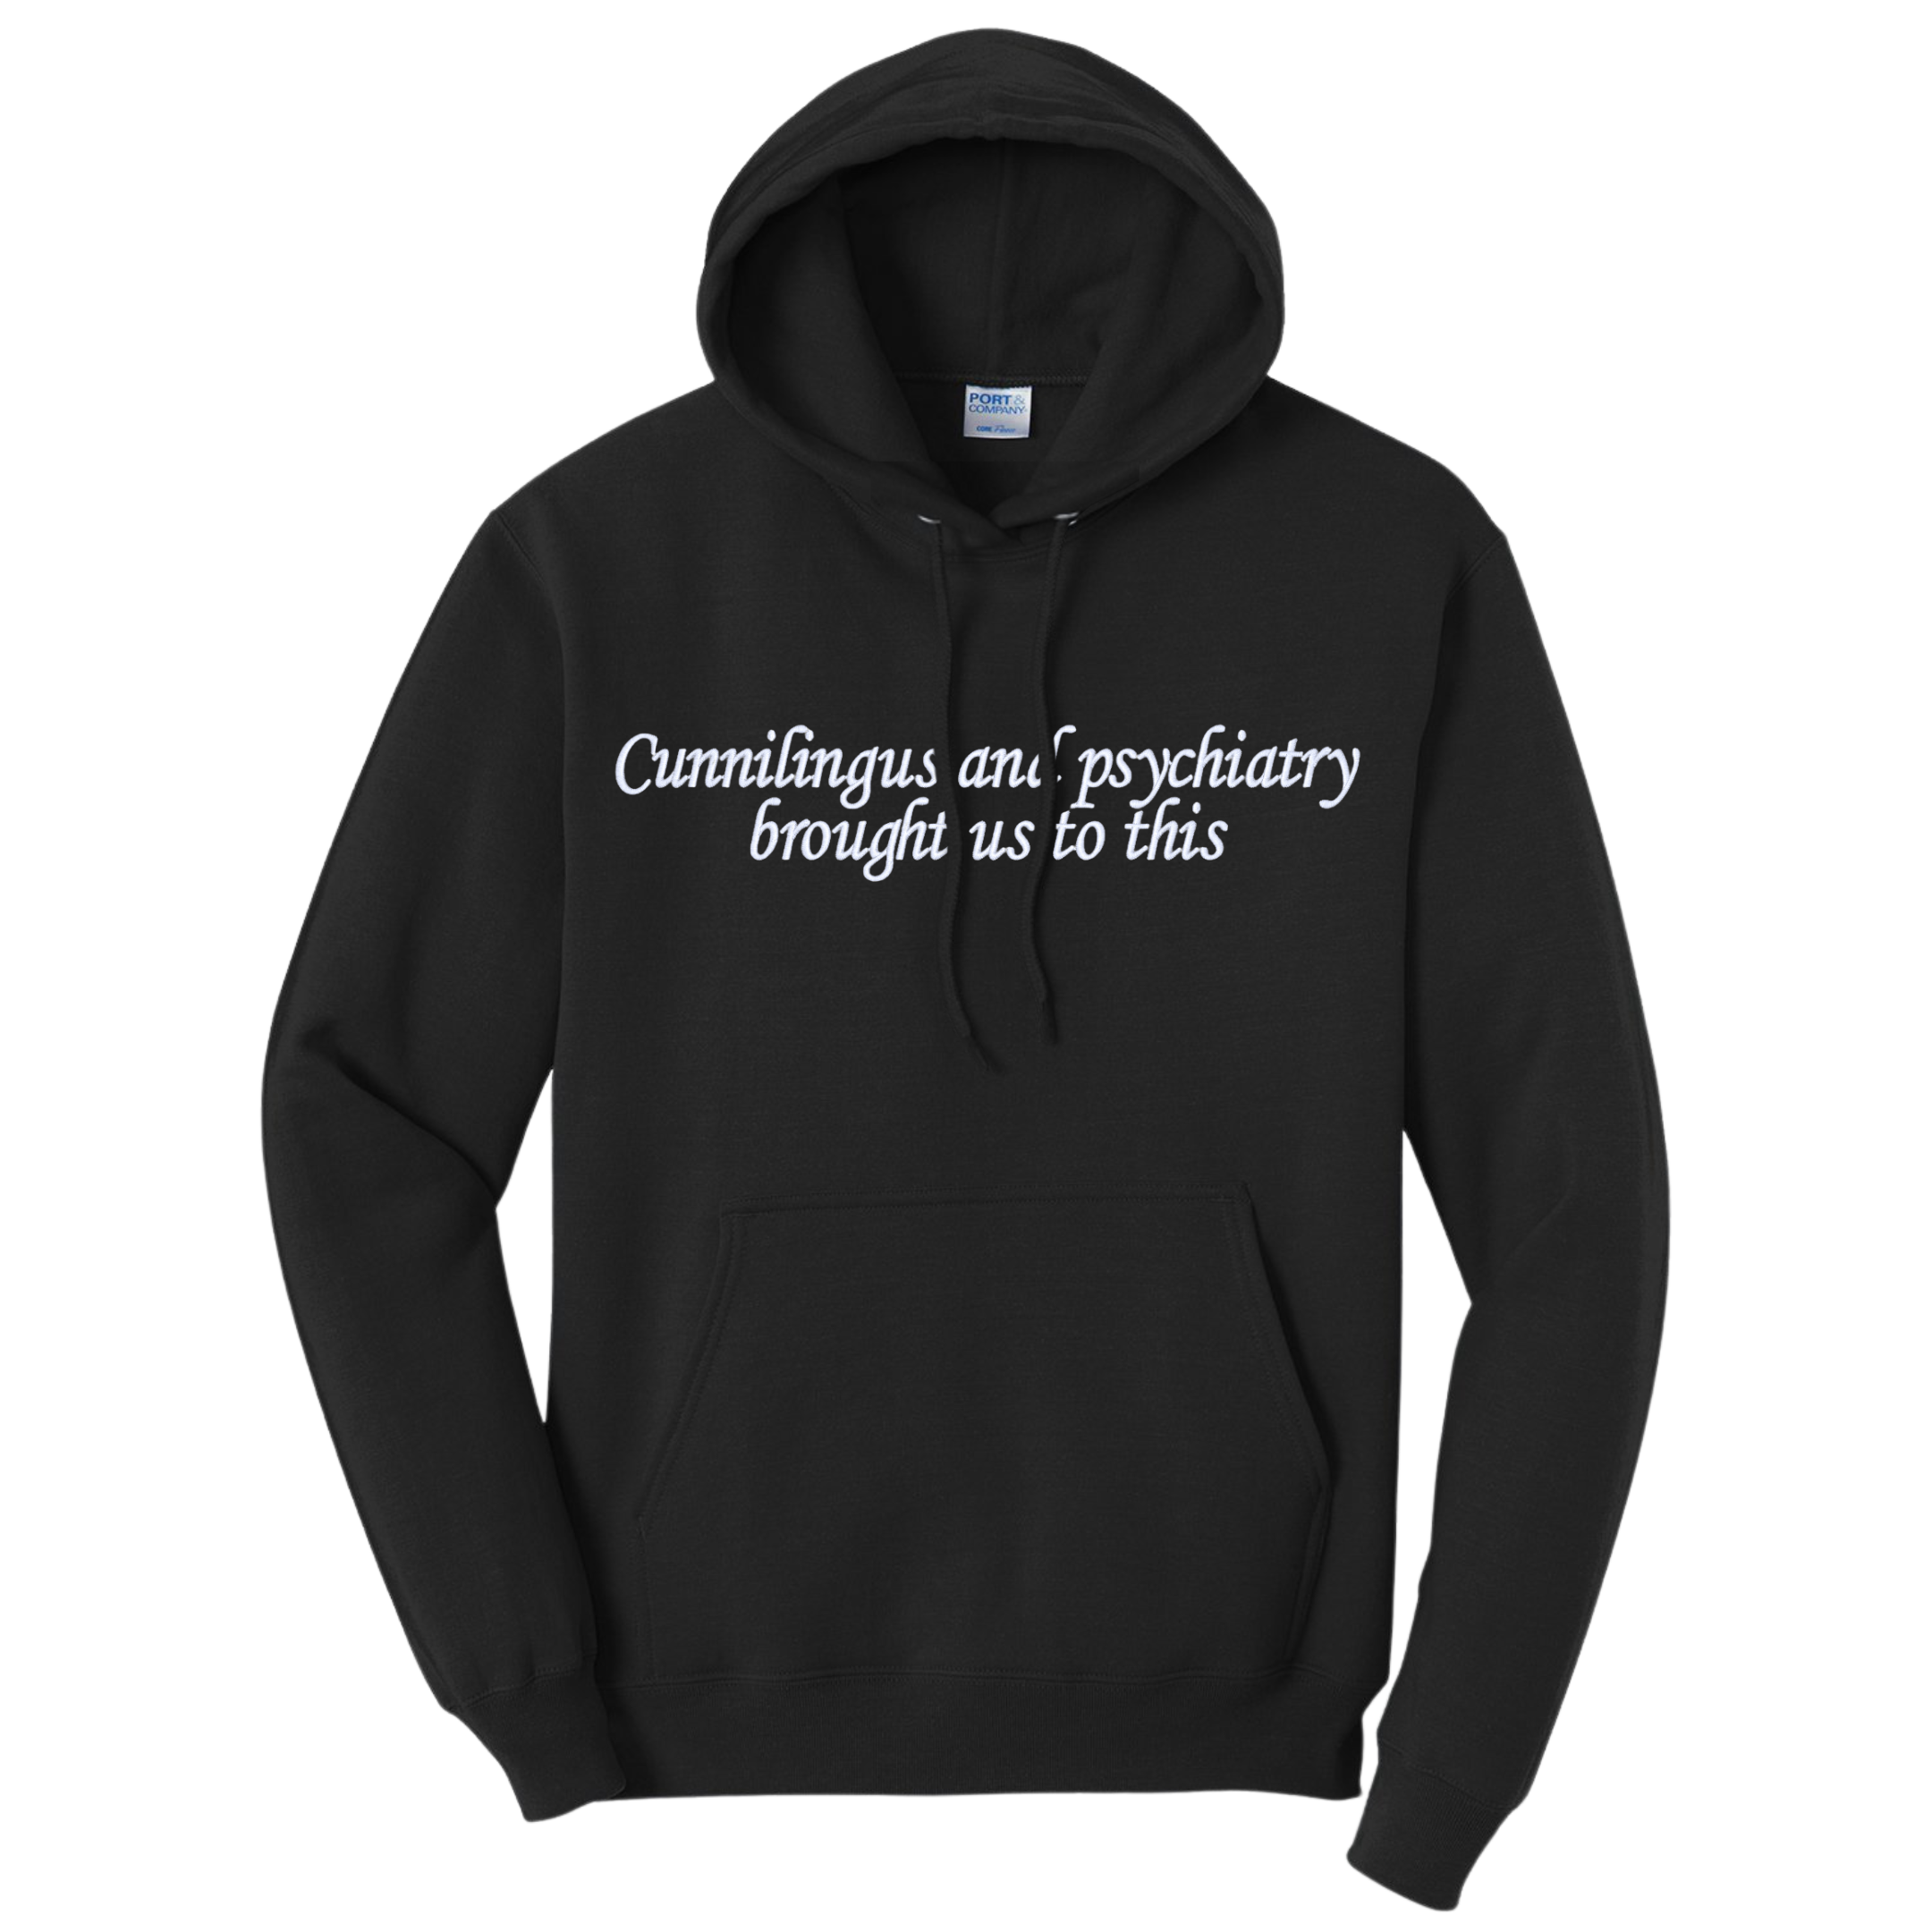 Cunnilingus and Psychiatry Brought Us To This Sopranos Quote Embroidered Black Hoodie, Unisex